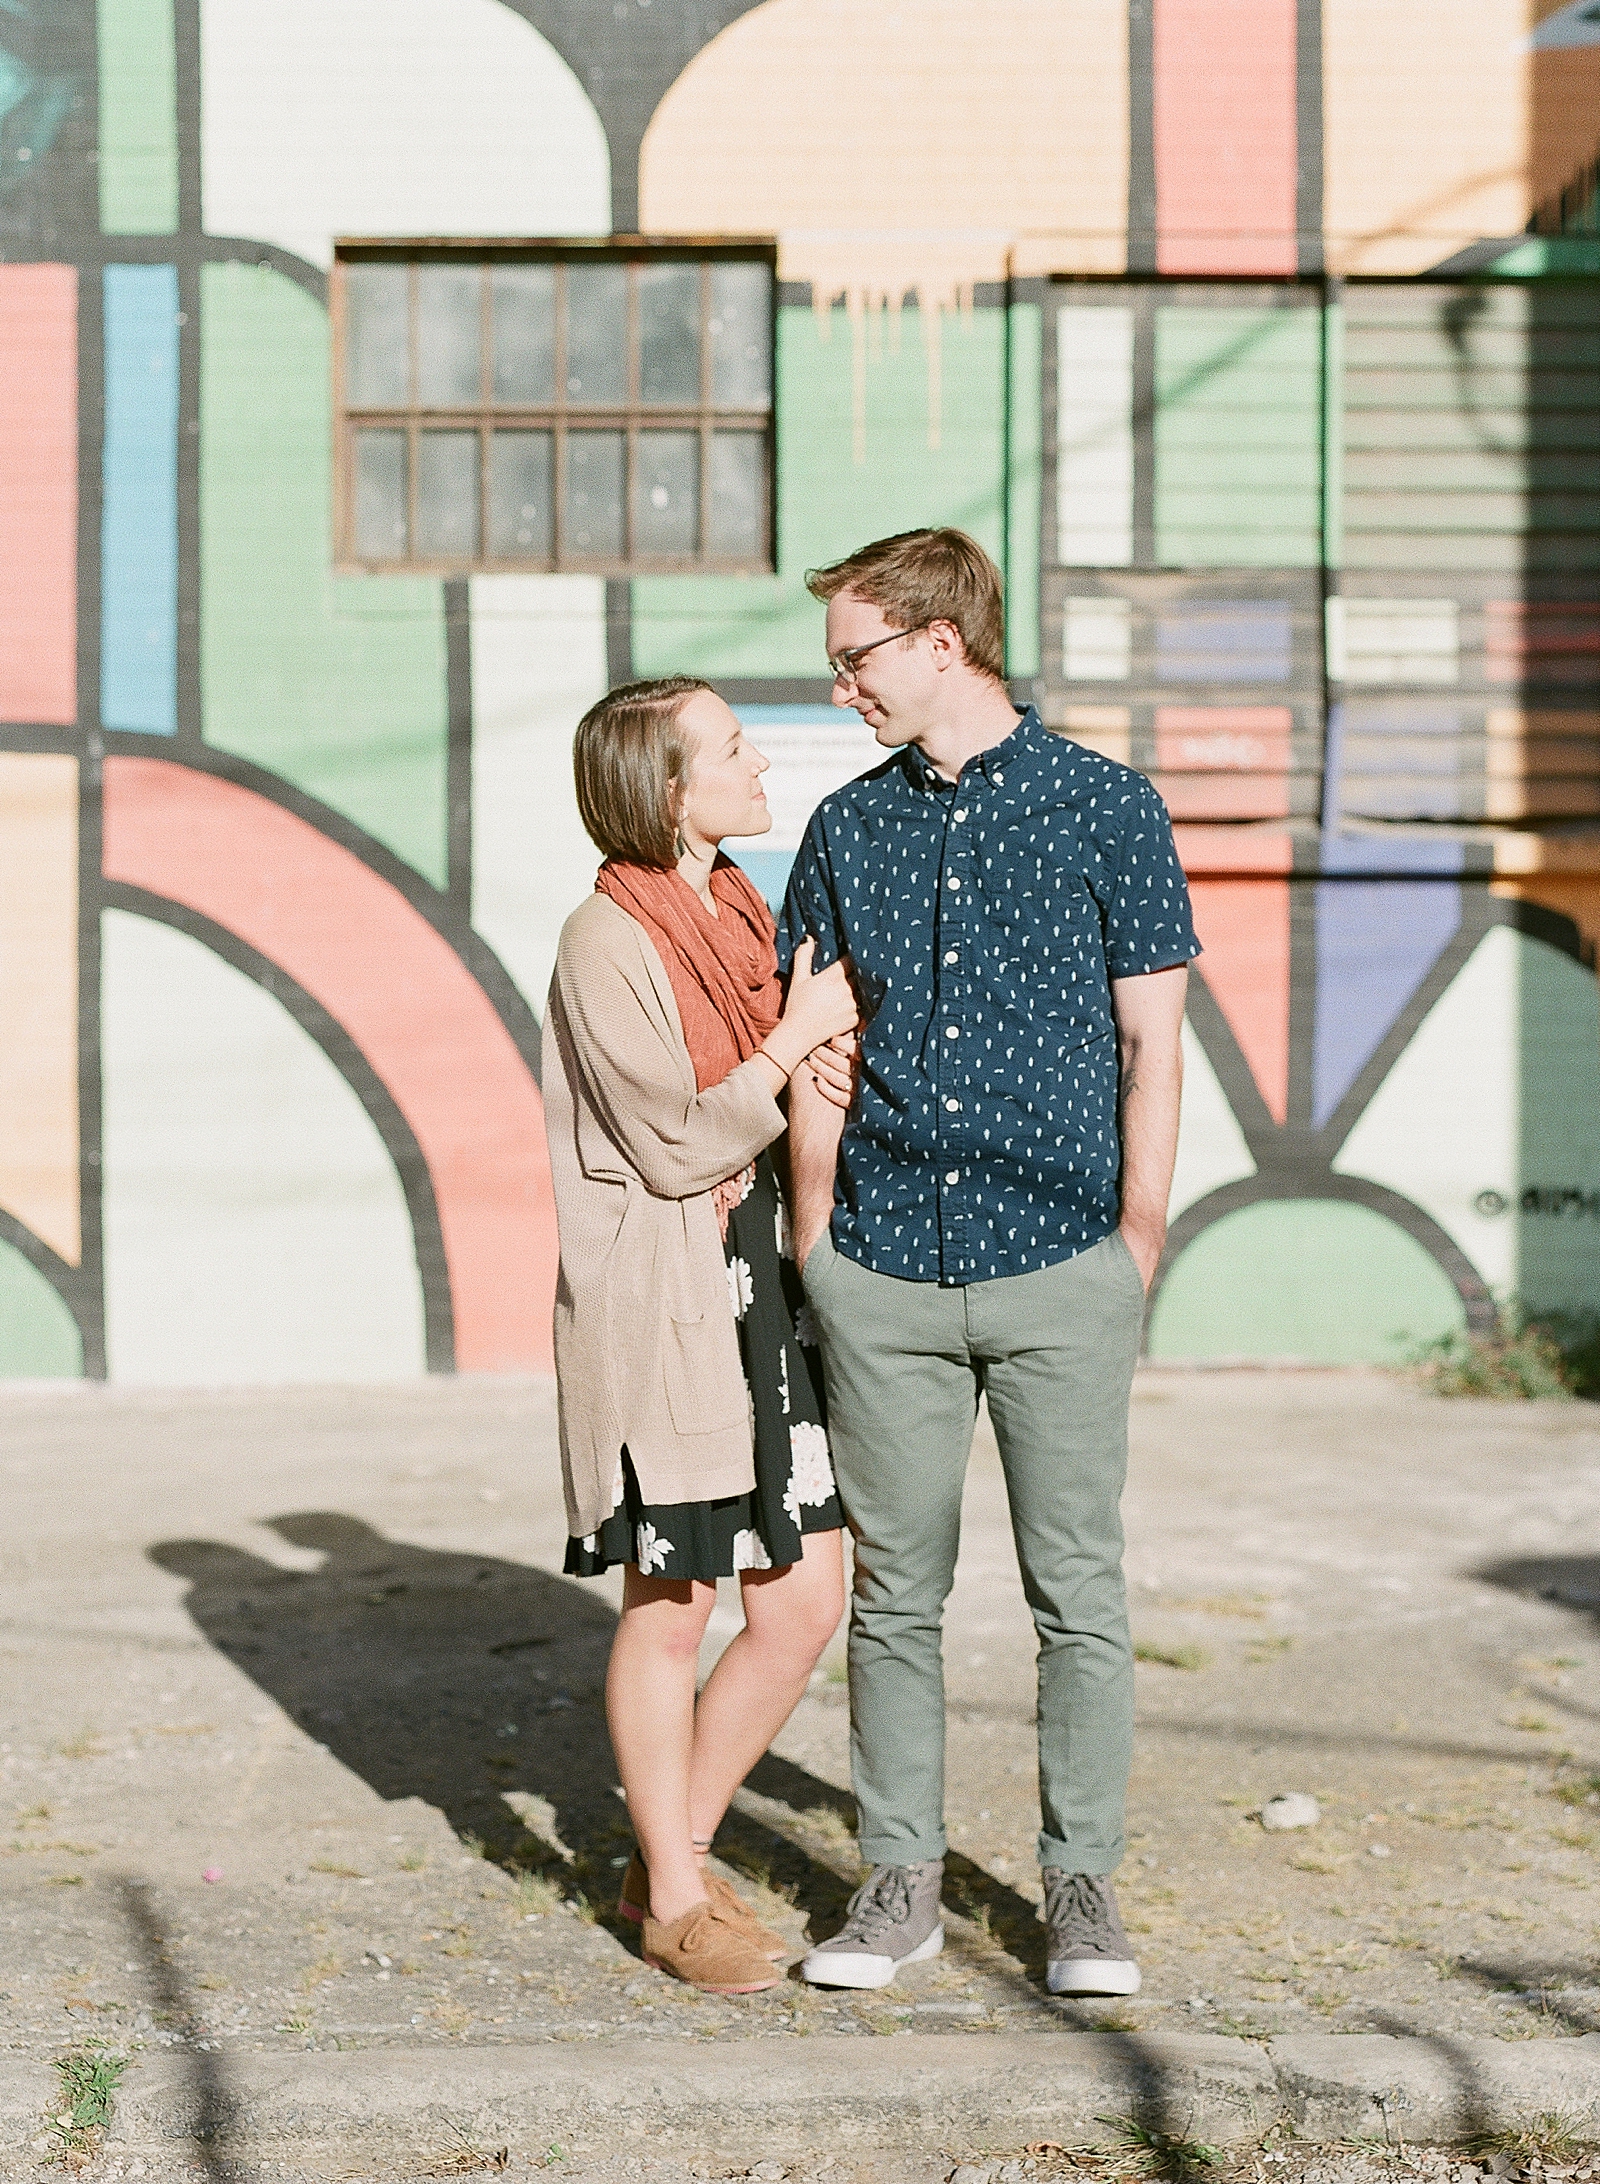 Downtown Asheville Engagement Session Couple Looking at each other hugging in front of graffiti wall Photo